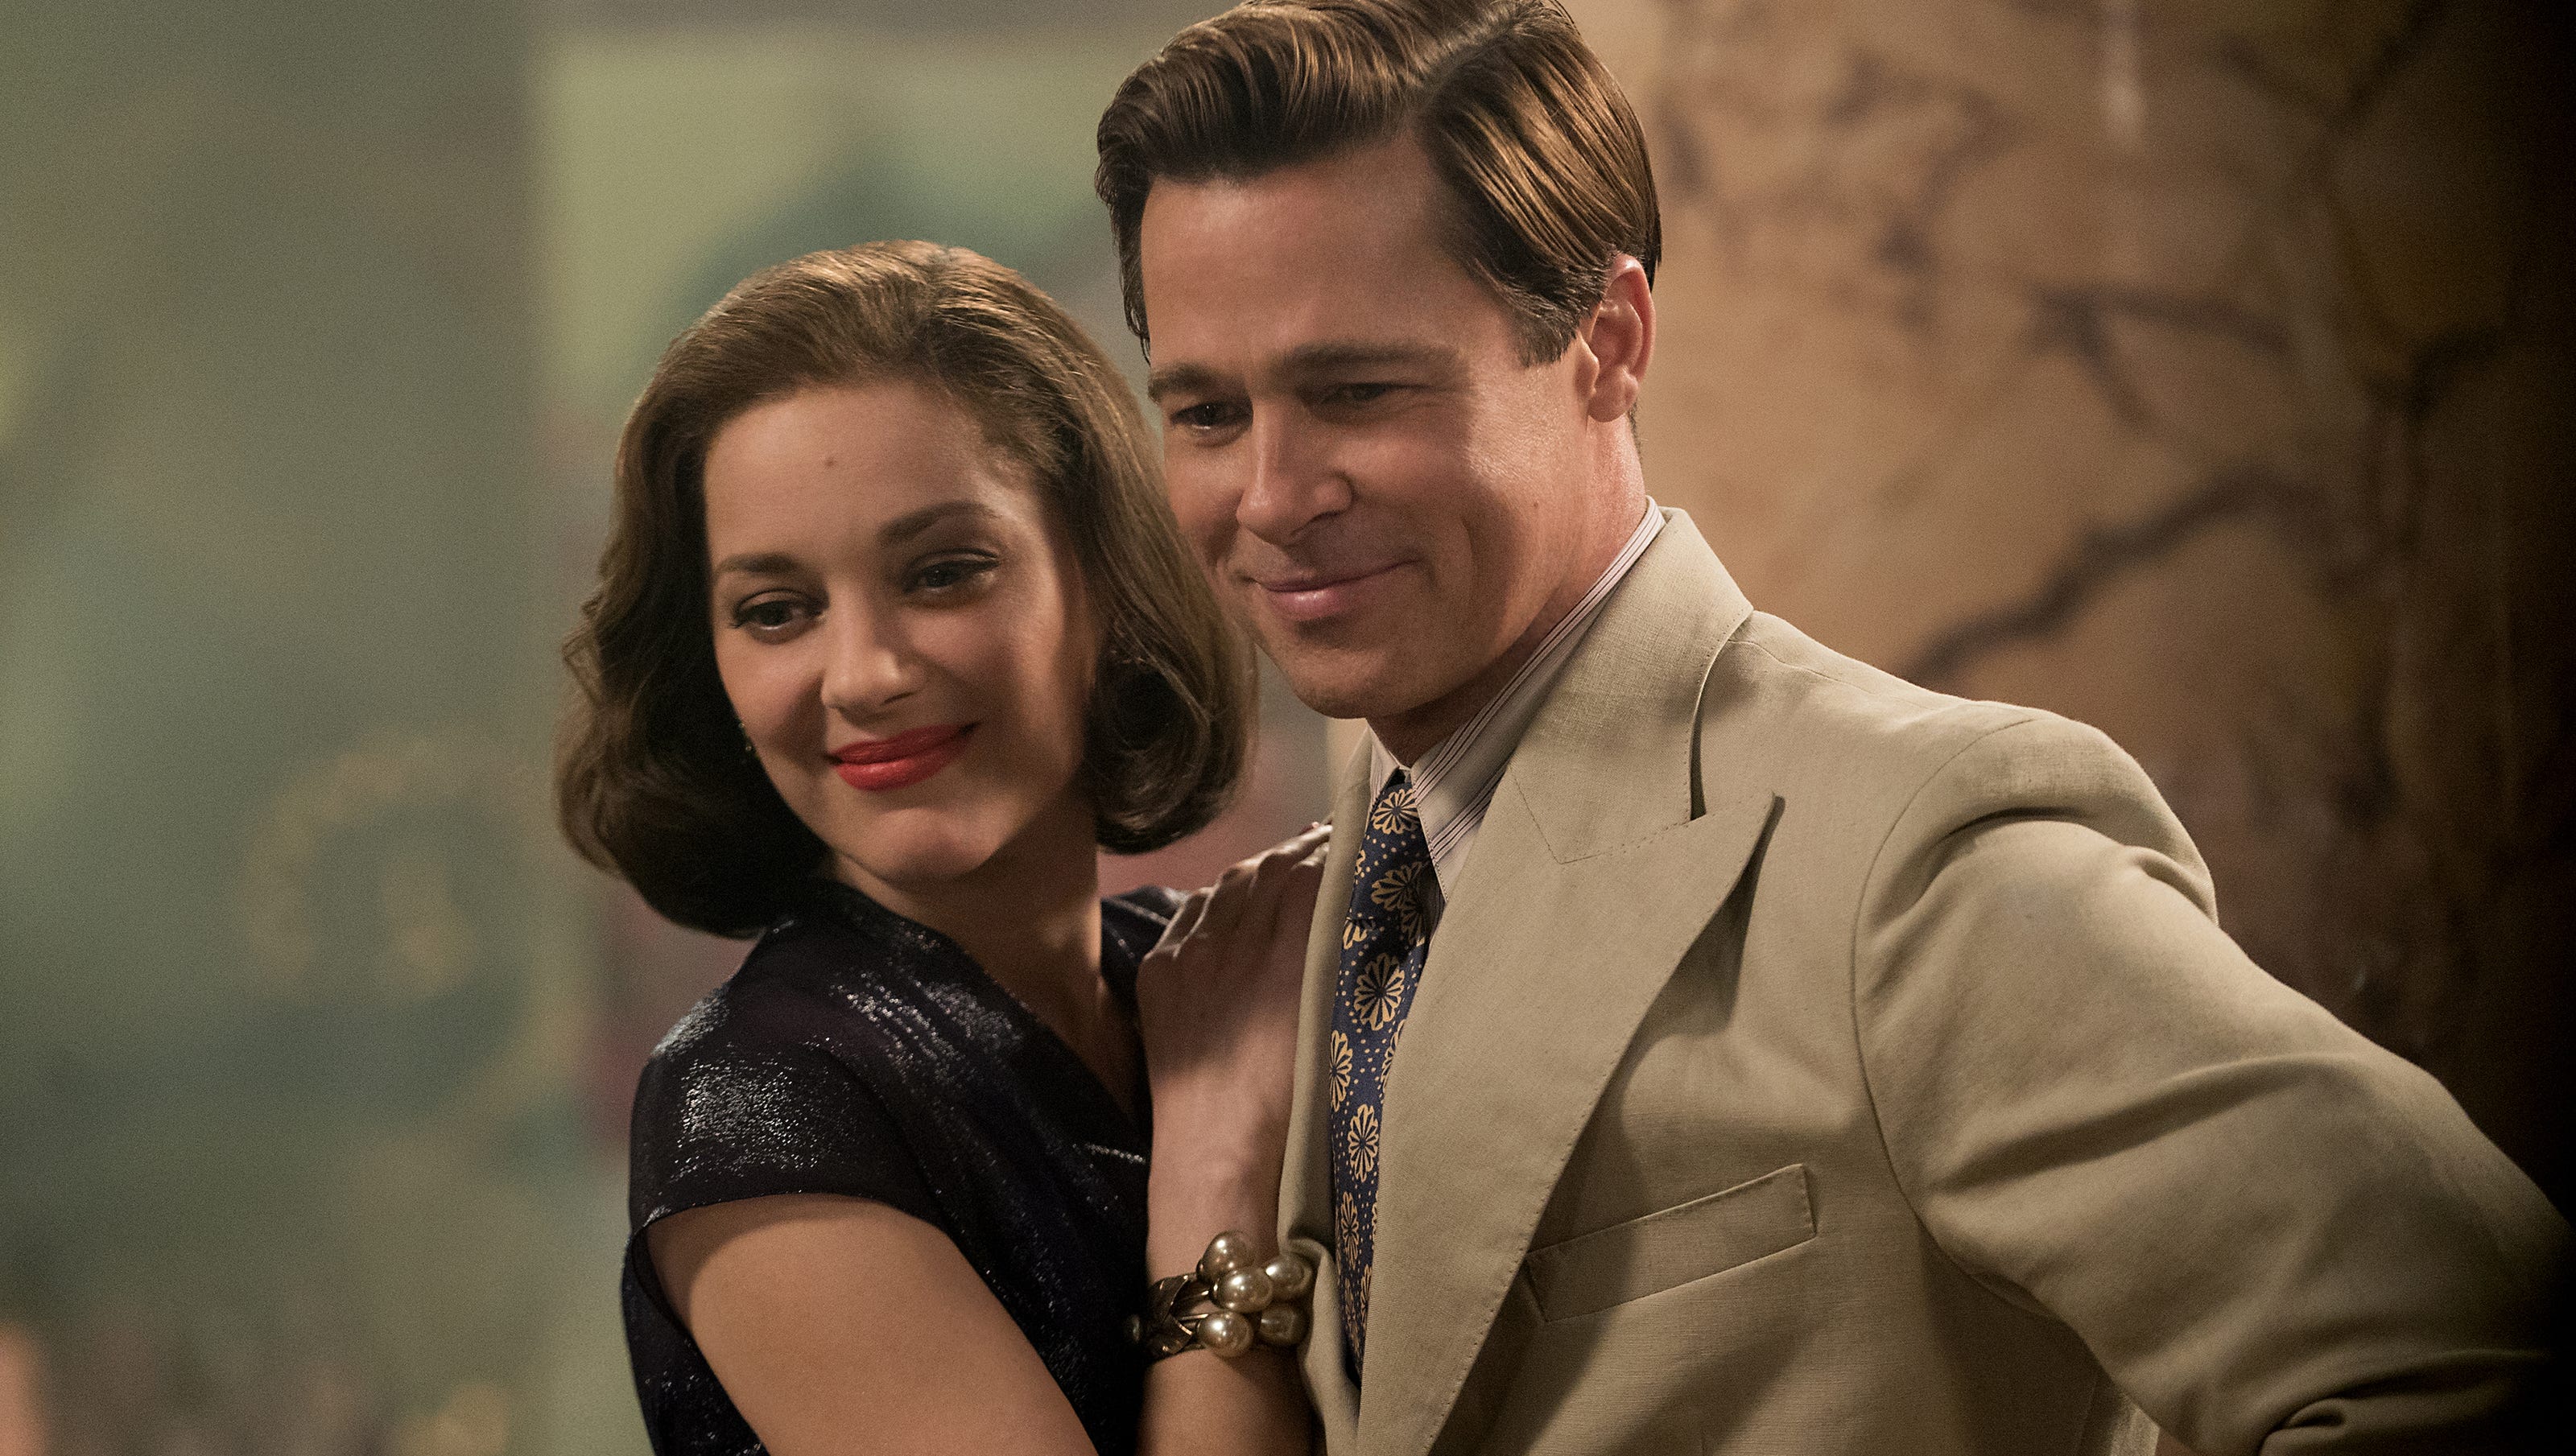 How off-screen drama could fuel 'Allied' box office